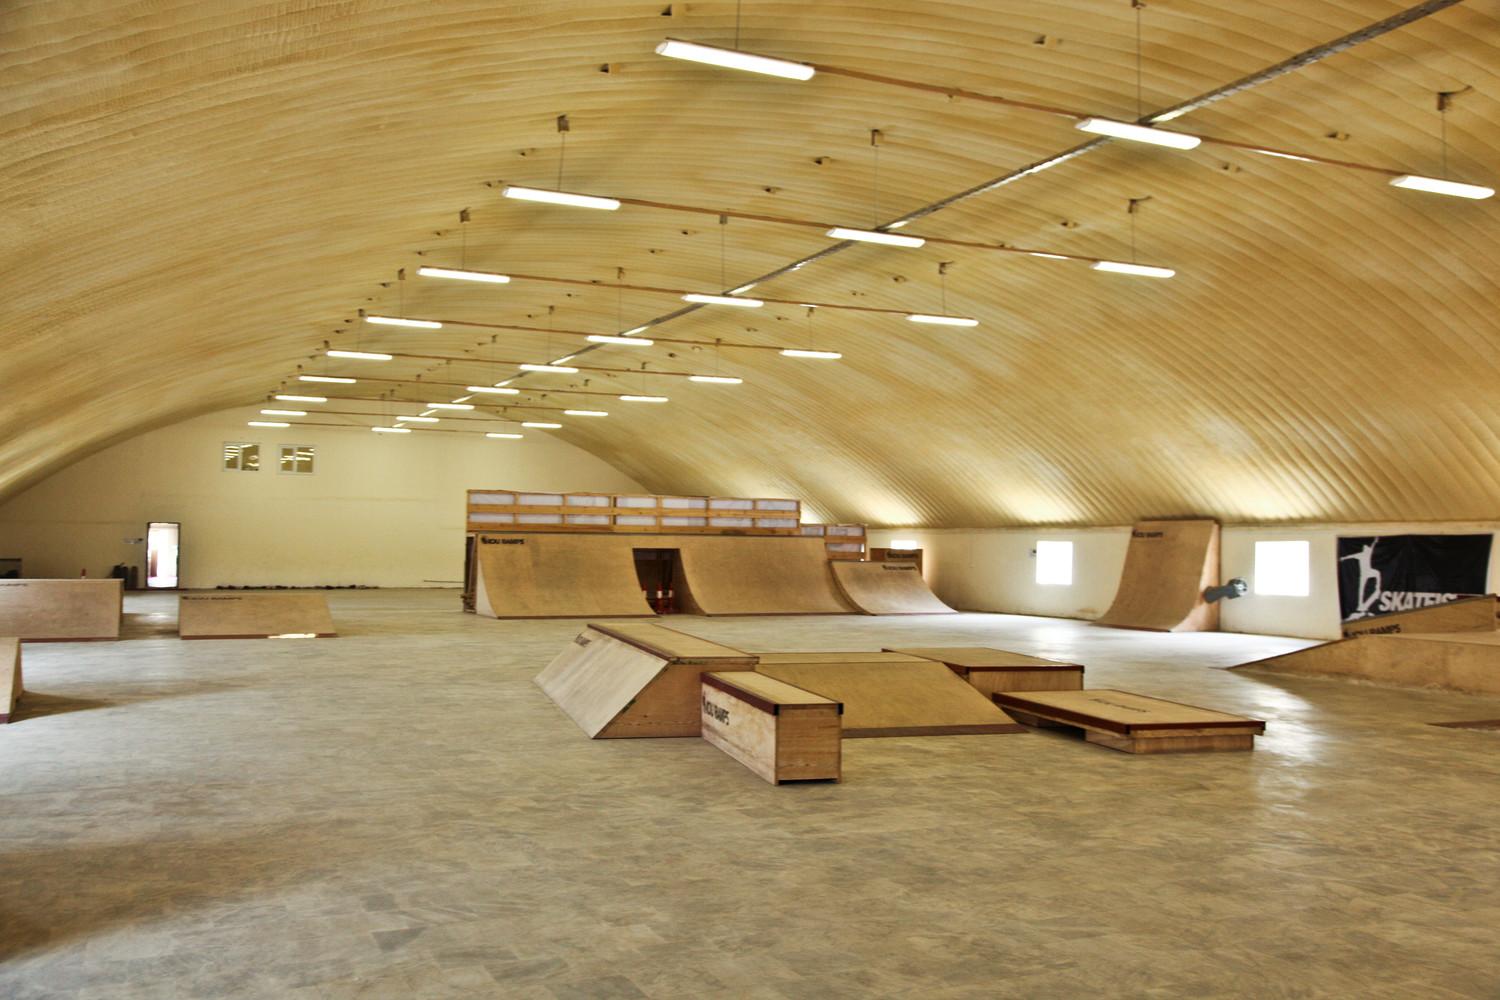 Overview of skateboarding park and sport hall (in back, with sport floor under construction)